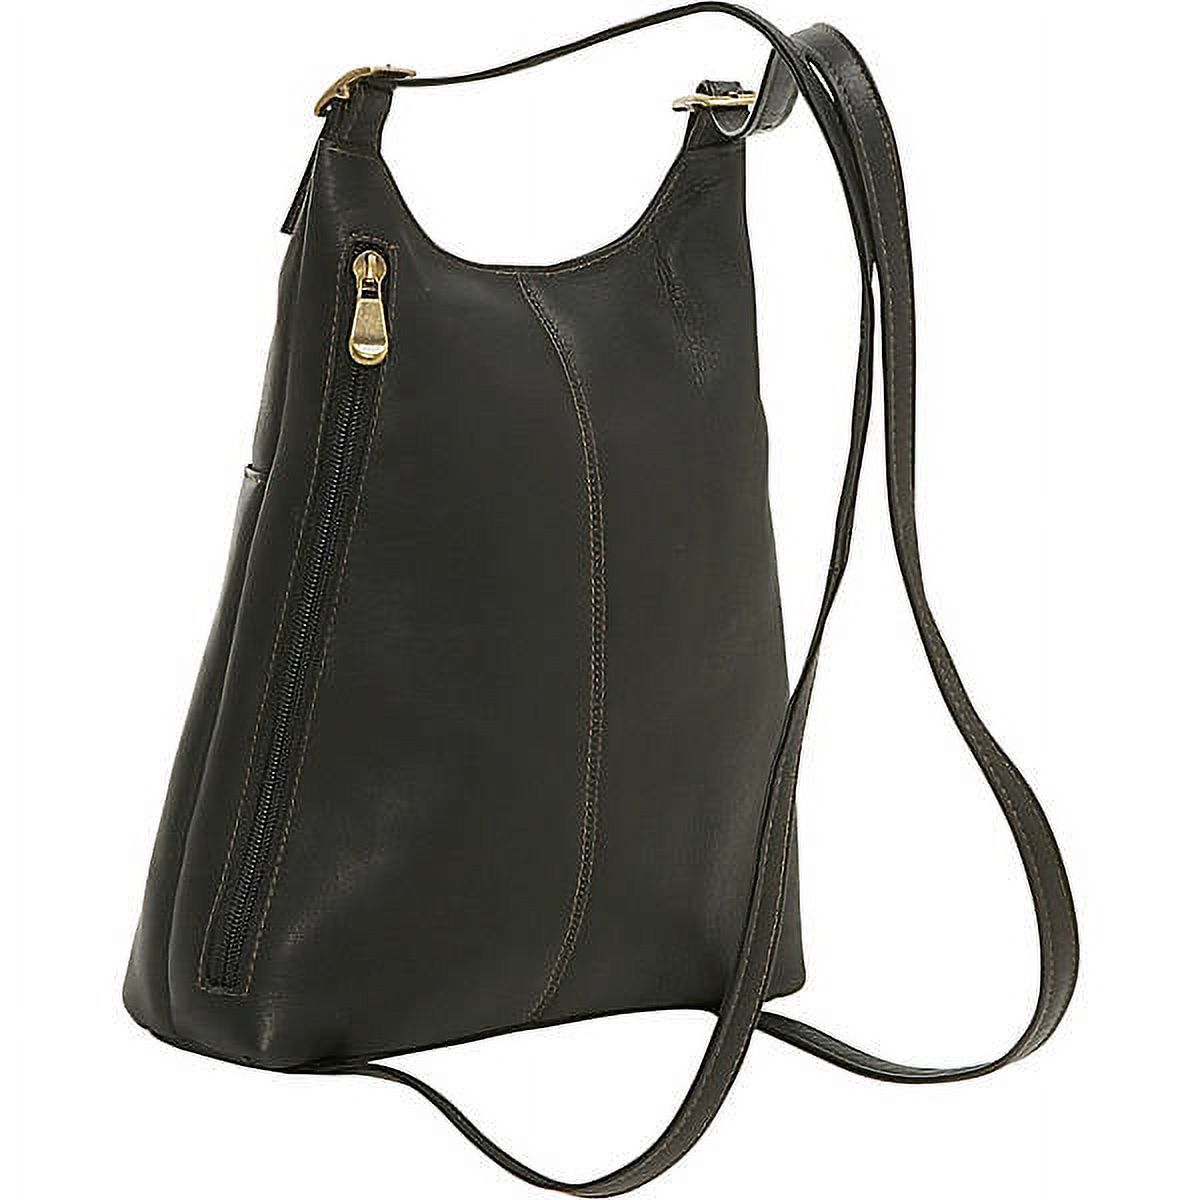 Le Donne Leather Womens Slim Sling Backpack LD-961 - image 3 of 6